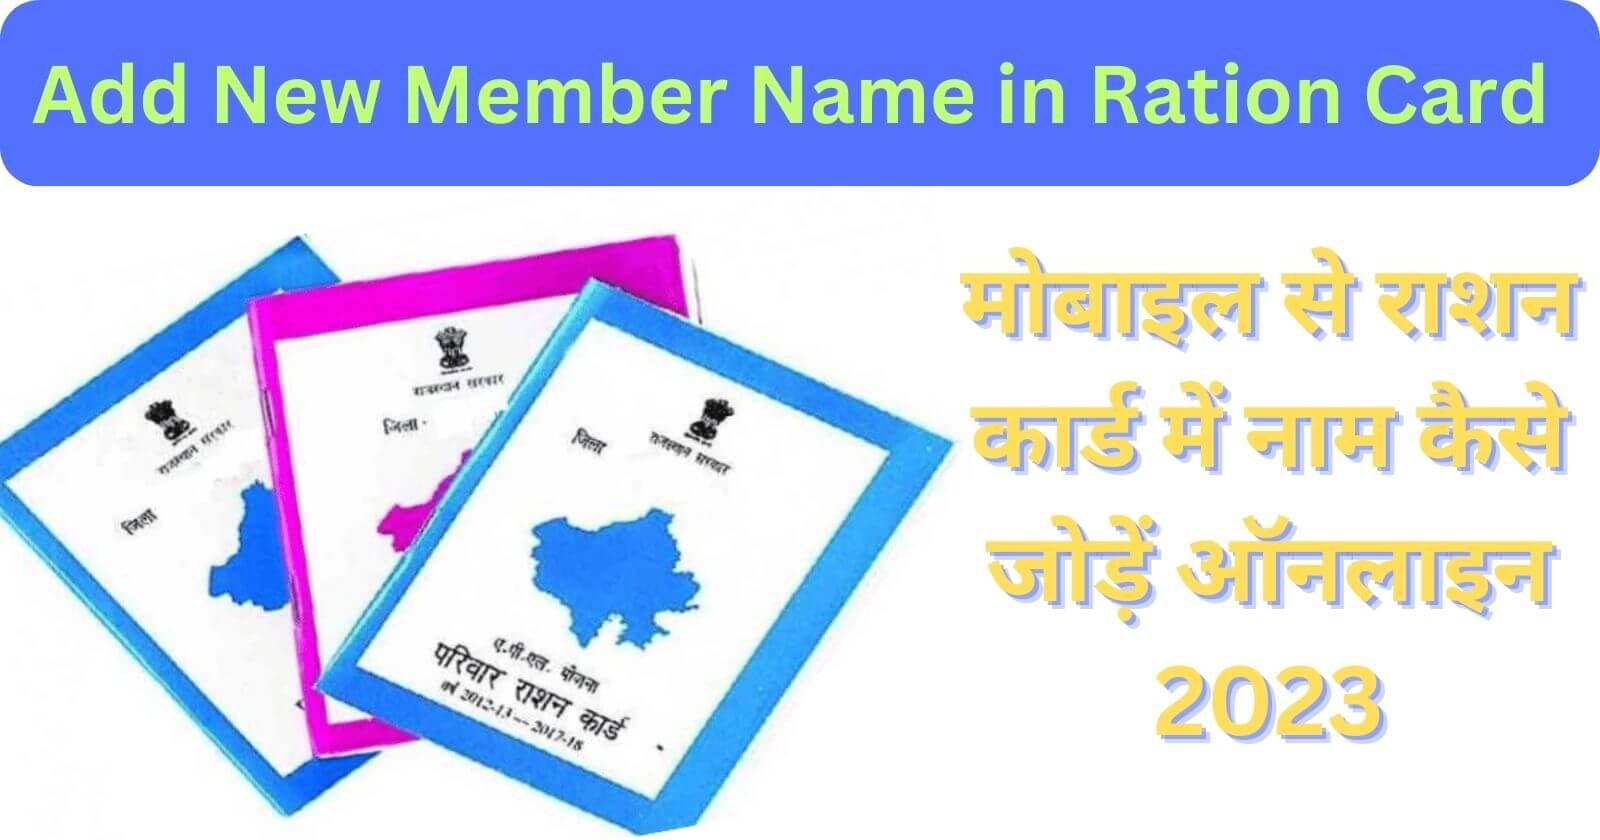 Add New Member Name in Ration Card